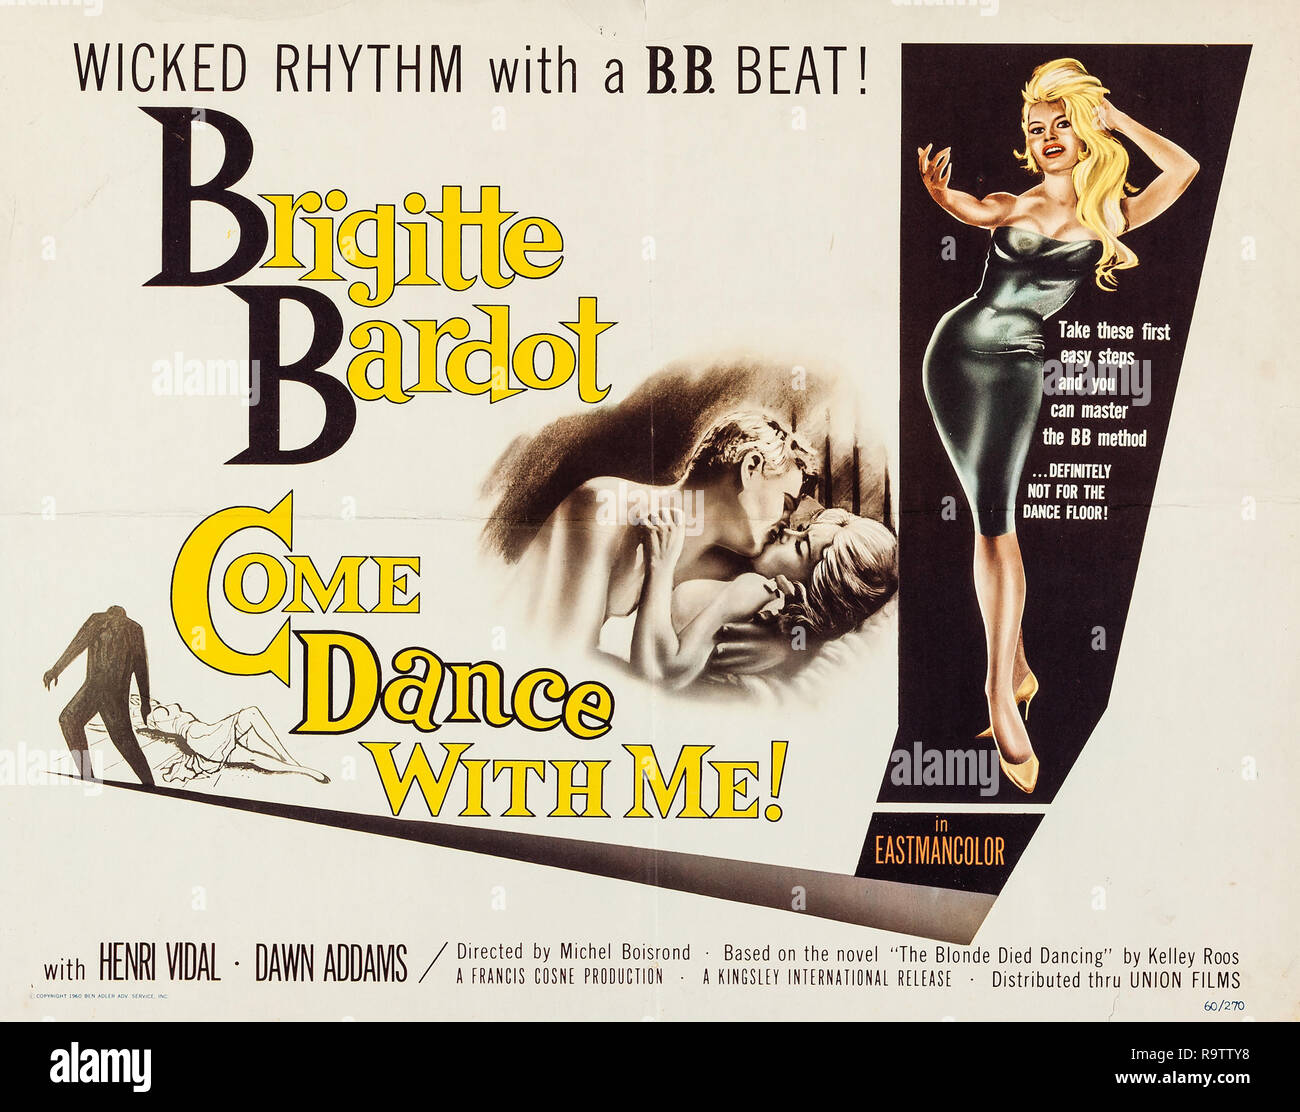 Come Dance with Me! (Kingsley International, 1959) Lobby Card / Poster  Brigitte Bardot File Reference # 33635 891THA Stock Photo